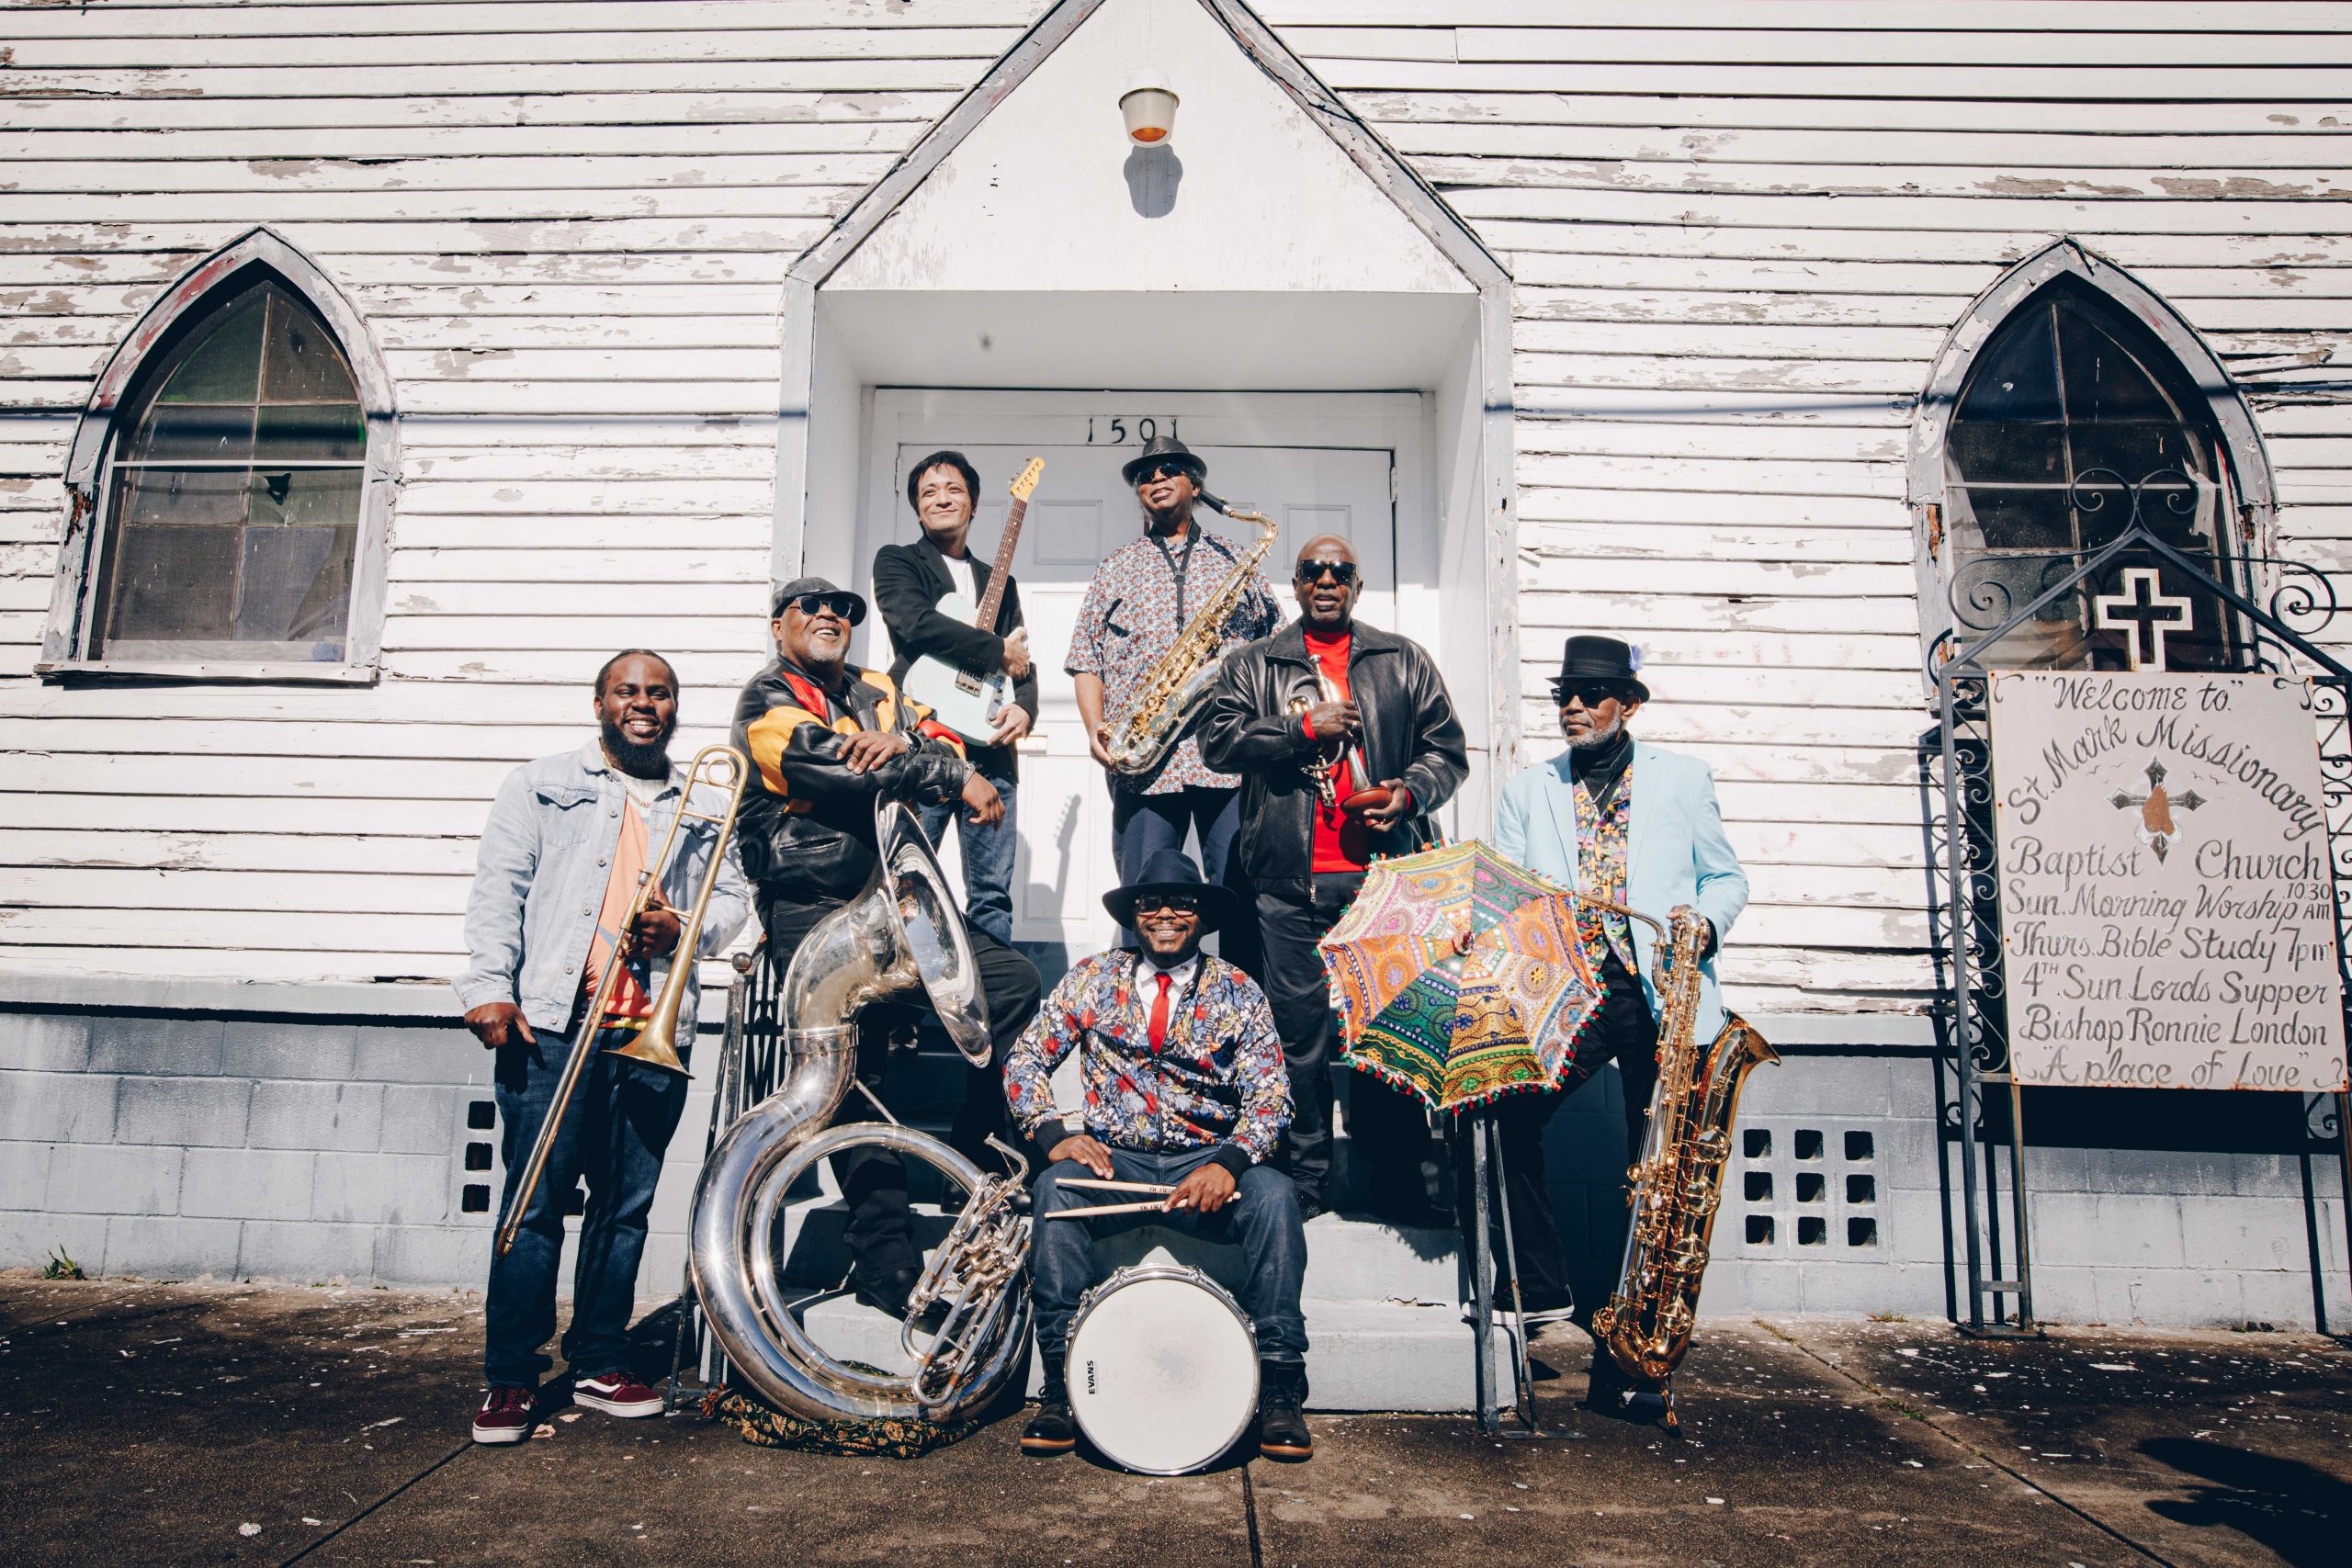 A promotional image of the Dirty Dozen Brass Band